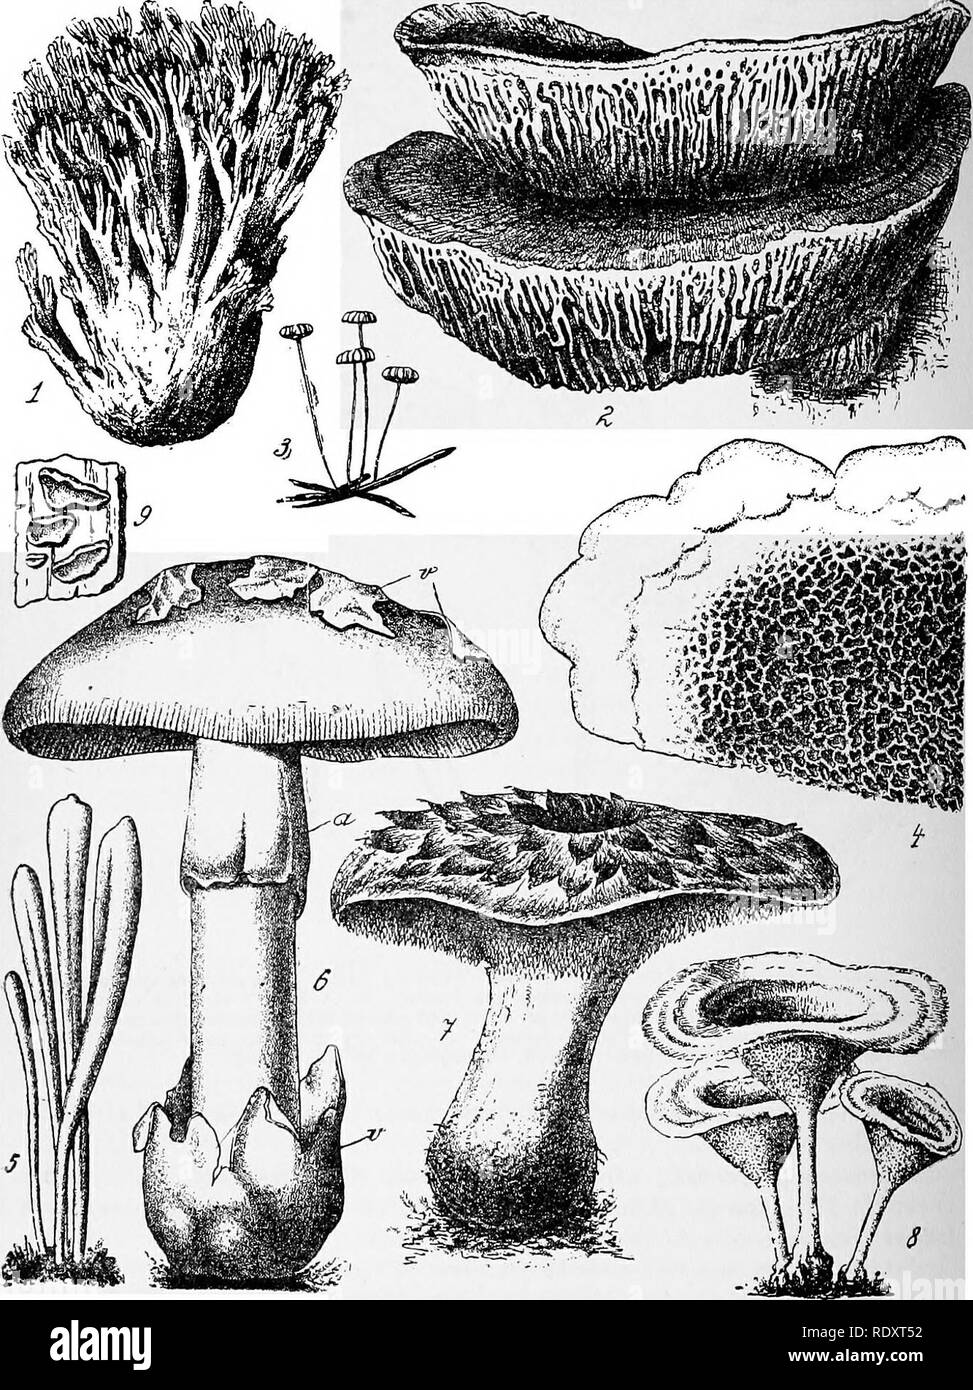 . A manual of poisonous plants, chiefly of eastern North America, with brief notes on economic and medicinal plants, and numerous illustrations. Poisonous plants. 232 MANUAL OF POISONOUS PLANTS. Fig. 68. Toadstools, Coral Fungi, &amp;c. Hymenomycetes. 1, Clavaria aurea. 2. Daedalea quercina. 3. Marasmius tenerrimus. 4. Dry-rot Fungus ( Merul-ms lacrimans). 5. ClavoYW argillacea. 6. Poisonous Toadstool (.Agaricus caesareus) a Ring; v Vellum. 7. Prickle Fungus (Hydnum imbricatum). 8, Polyporus perennis. 8. Corticium amorphum on wood. 1-4, 6-9 after Wettstein. 5 after Harper.. Please note that th Stock Photo